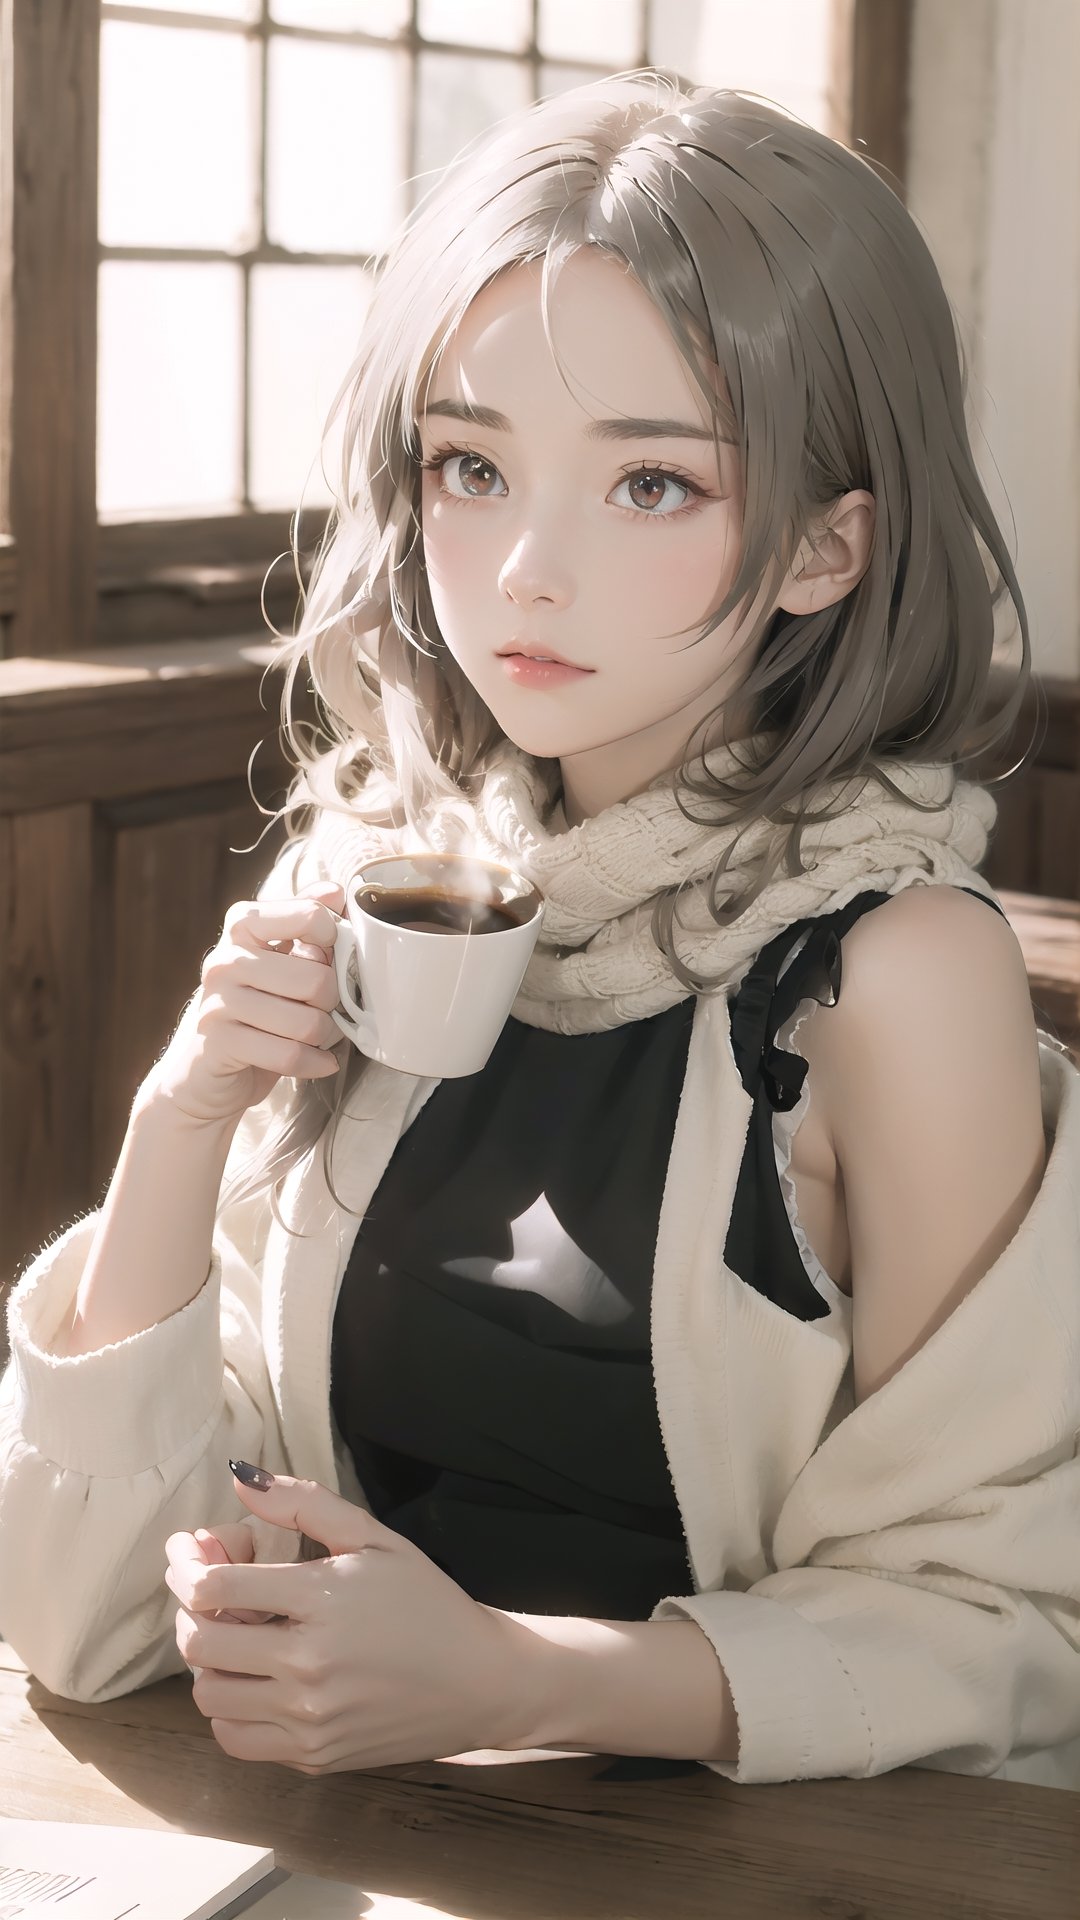 amiya(arknights), 1girl,8k wallpaper,extremely detailed figure, amazing beauty, detailed characters, {detailed background},aestheticism, sitting, winter, coffee shop, corner, coat, scarf, large breasts, gray hair, red eyes, emotionless, obedient, obedient, thick eyebrows, small nose, full lips, long eyelashes, delicate neck, slender shoulders, bare arms, delicate hands, long fingers, pointed nails, high cheekbones, oval face, smooth skin, rosy cheeks, cup of coffee, saucer, steam, warm, cozy, comfortable, relaxed, calm, quiet, peaceful, serene, contemplative, close-up, best quality, amazing quality, very aesthetic, absurdres, Christmas dresses 